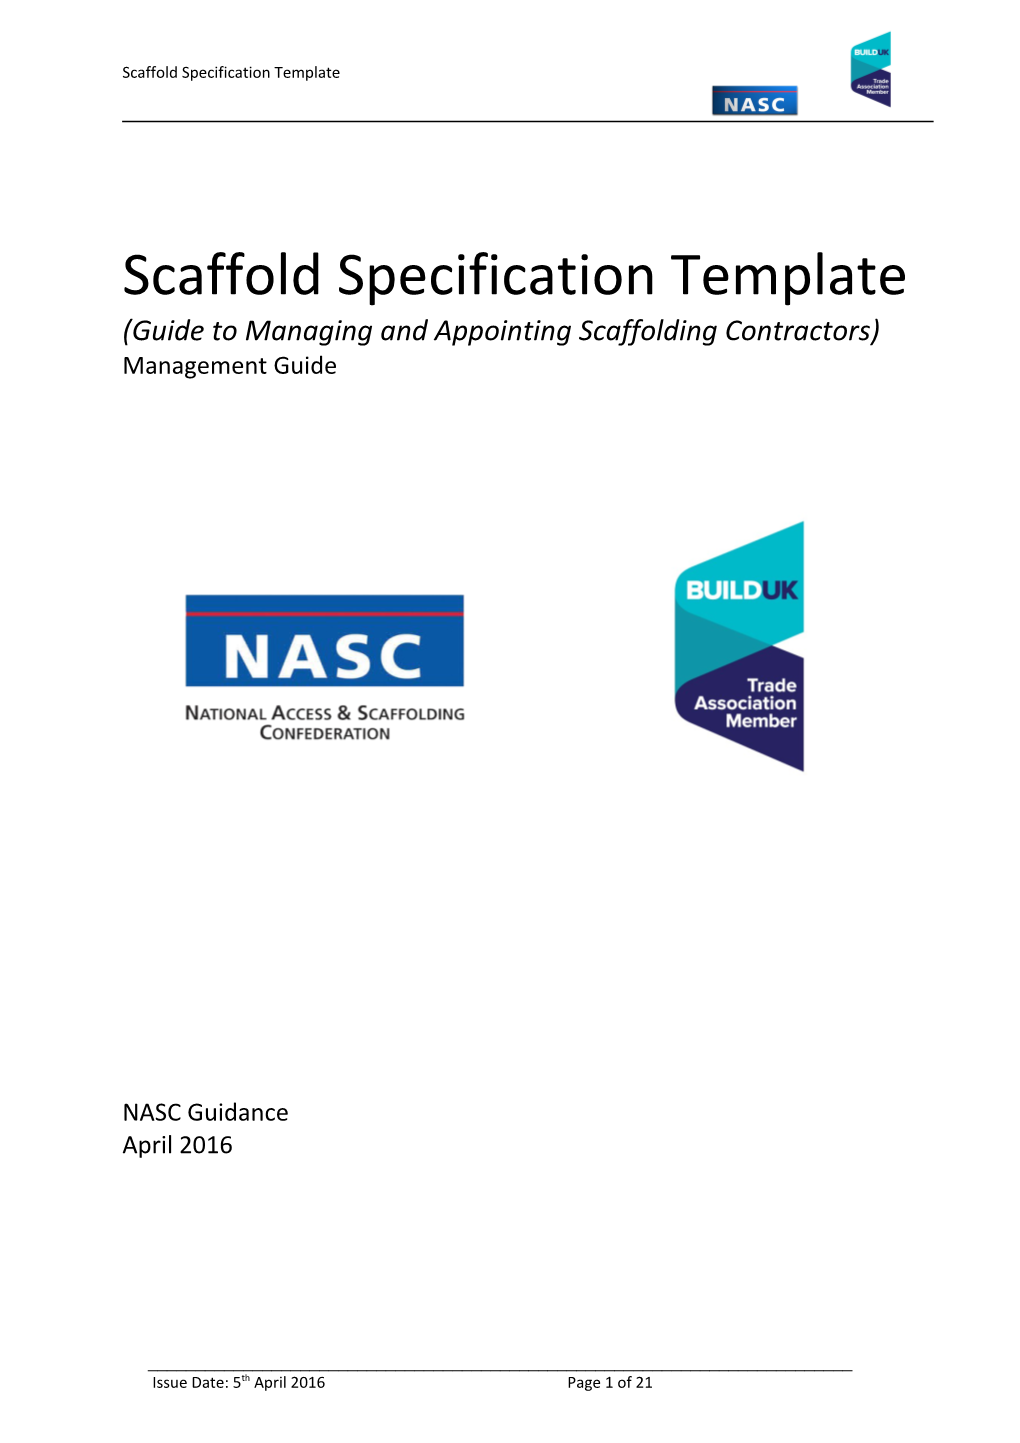 Guide to Managing and Appointing Scaffolding Contractors